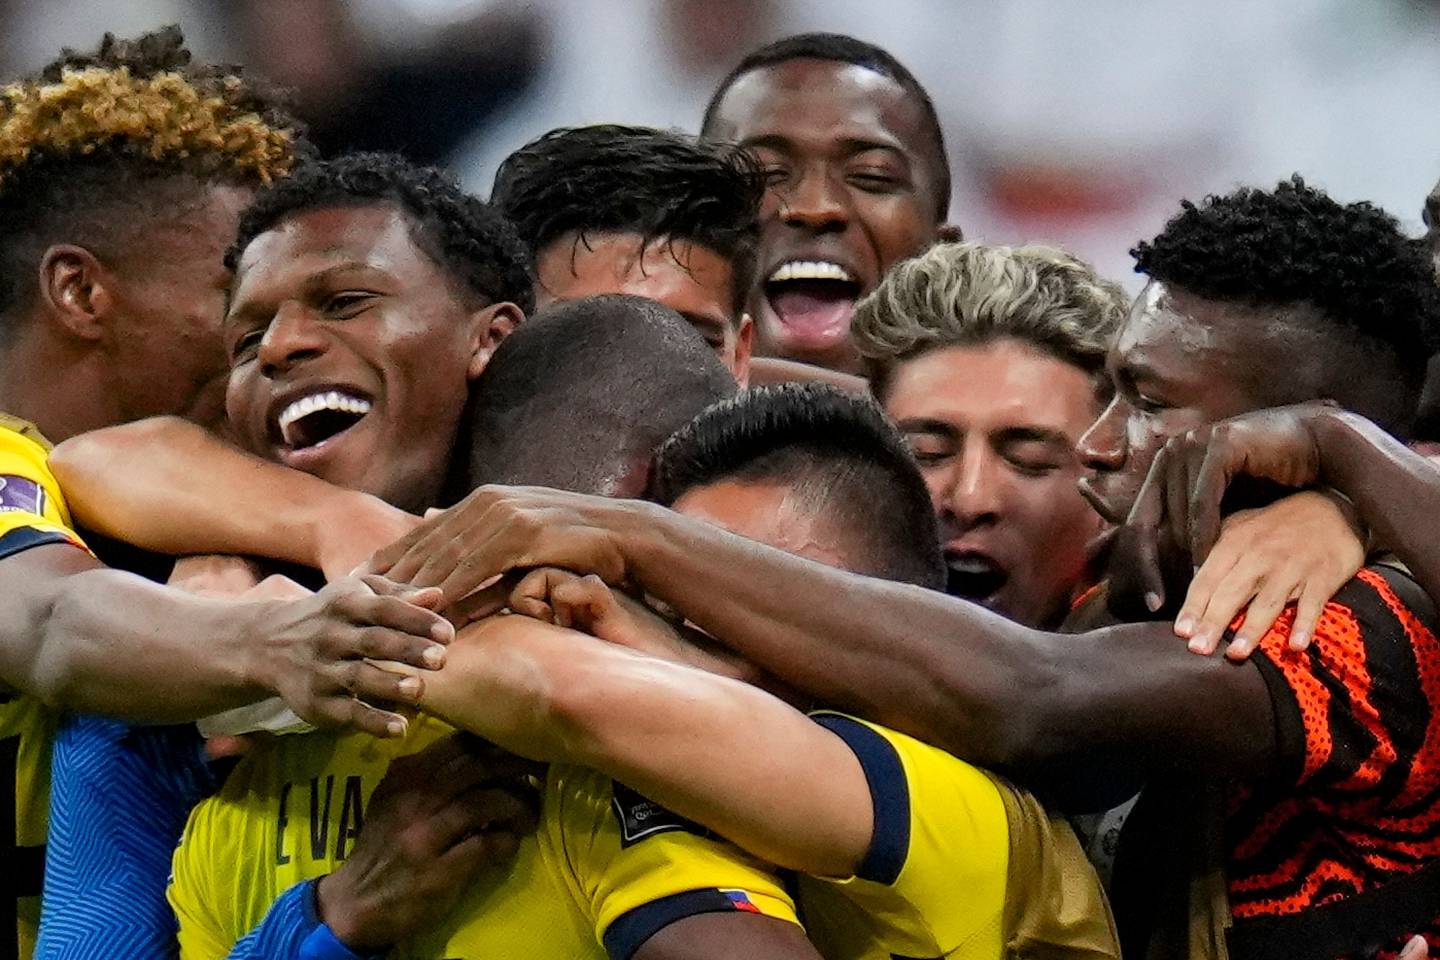 FIFA World Cup 2022 Qatar: Many firsts in this FIFA edition  FIFA World Cup  2022 Qatar vs Ecuador squad, schedule dates, opening ceremony time, teams,  broadcast in India, Qatar stadiums, tickets